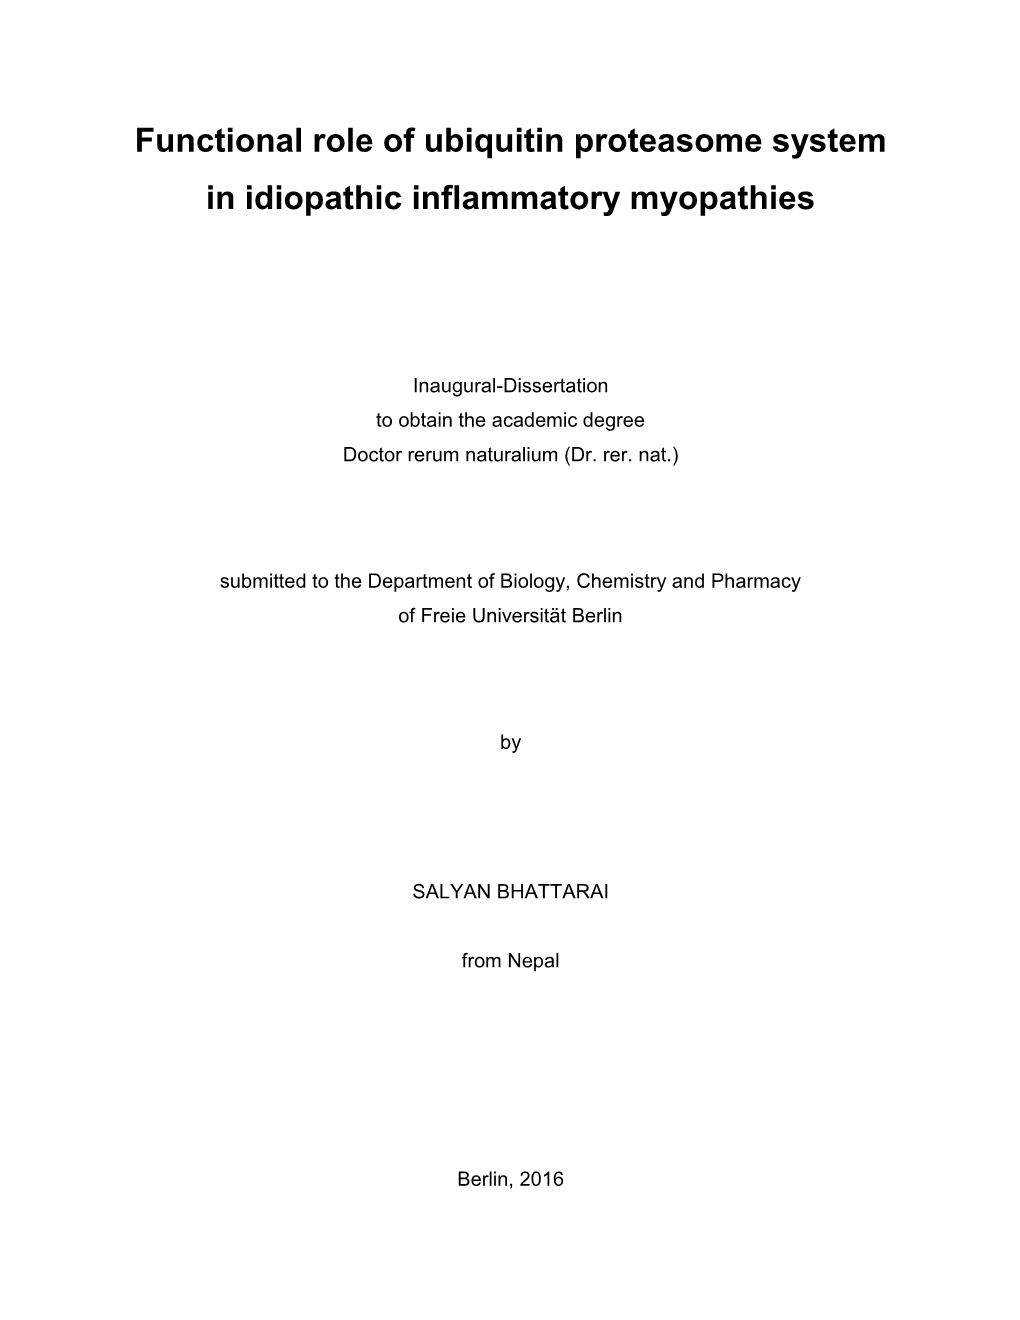 Functional Role of Ubiquitin Proteasome System in Idiopathic Inflammatory Myopathies